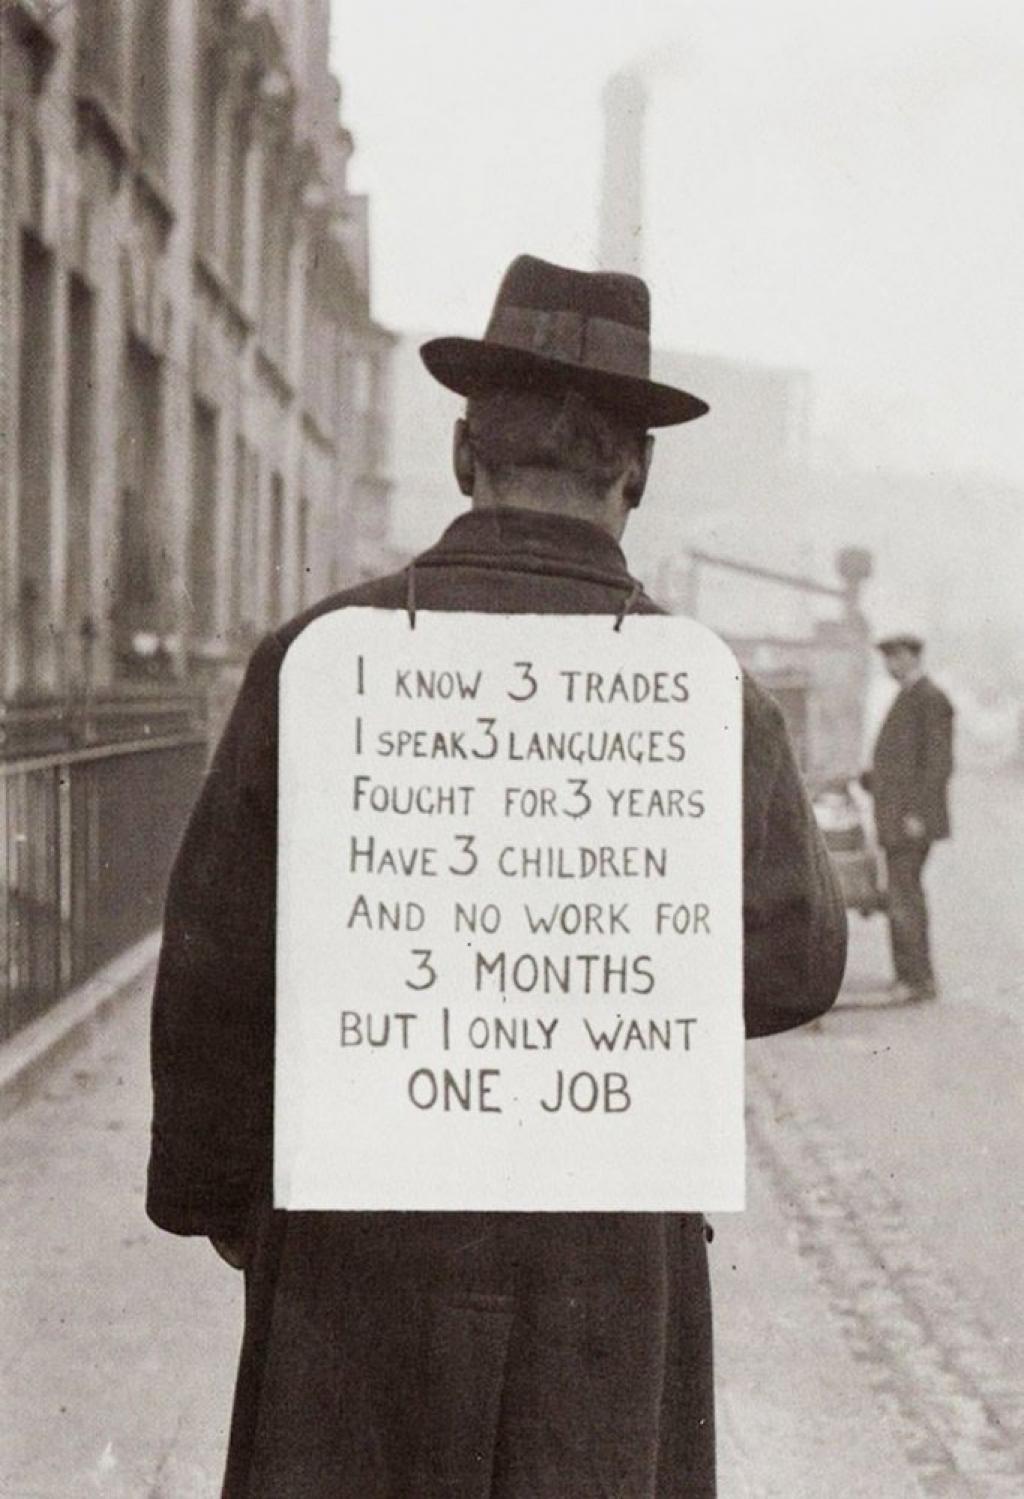 24. Job hunting in 1930 during the great depression of 1930